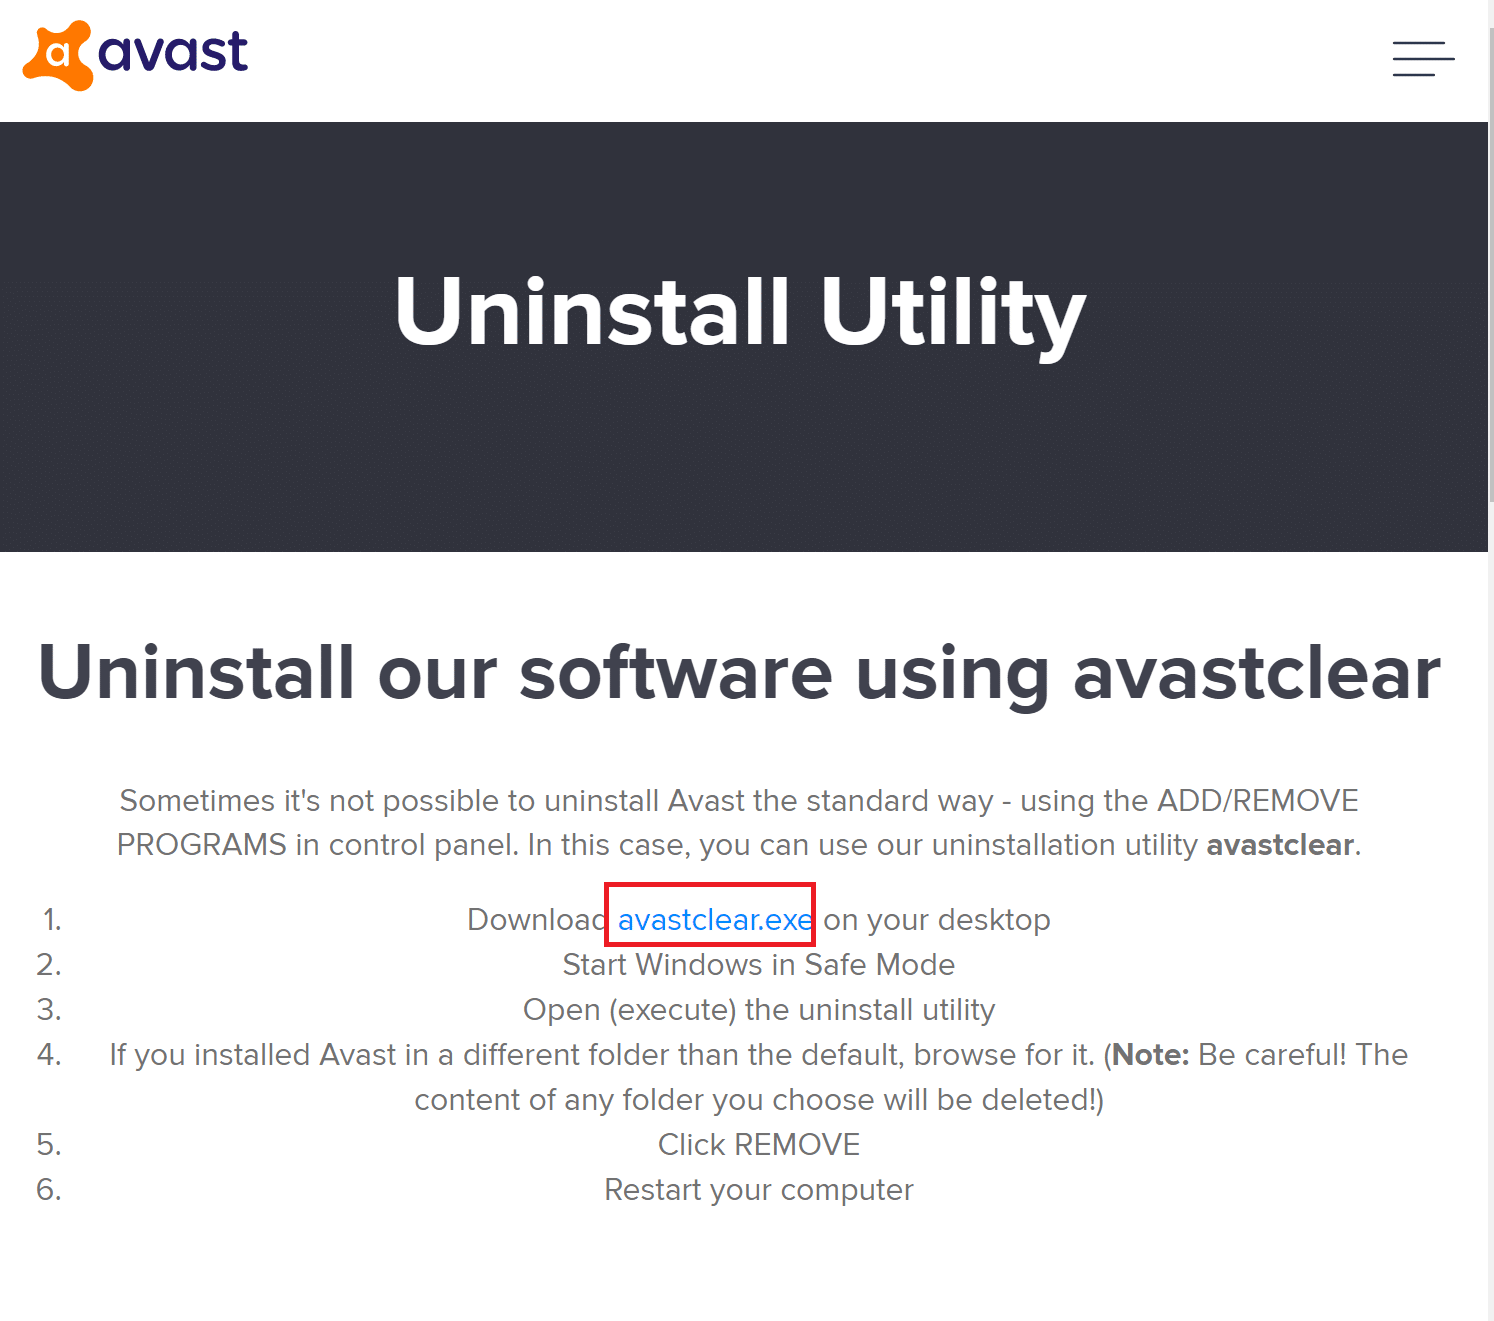 download avast uninstall utility from avast website 